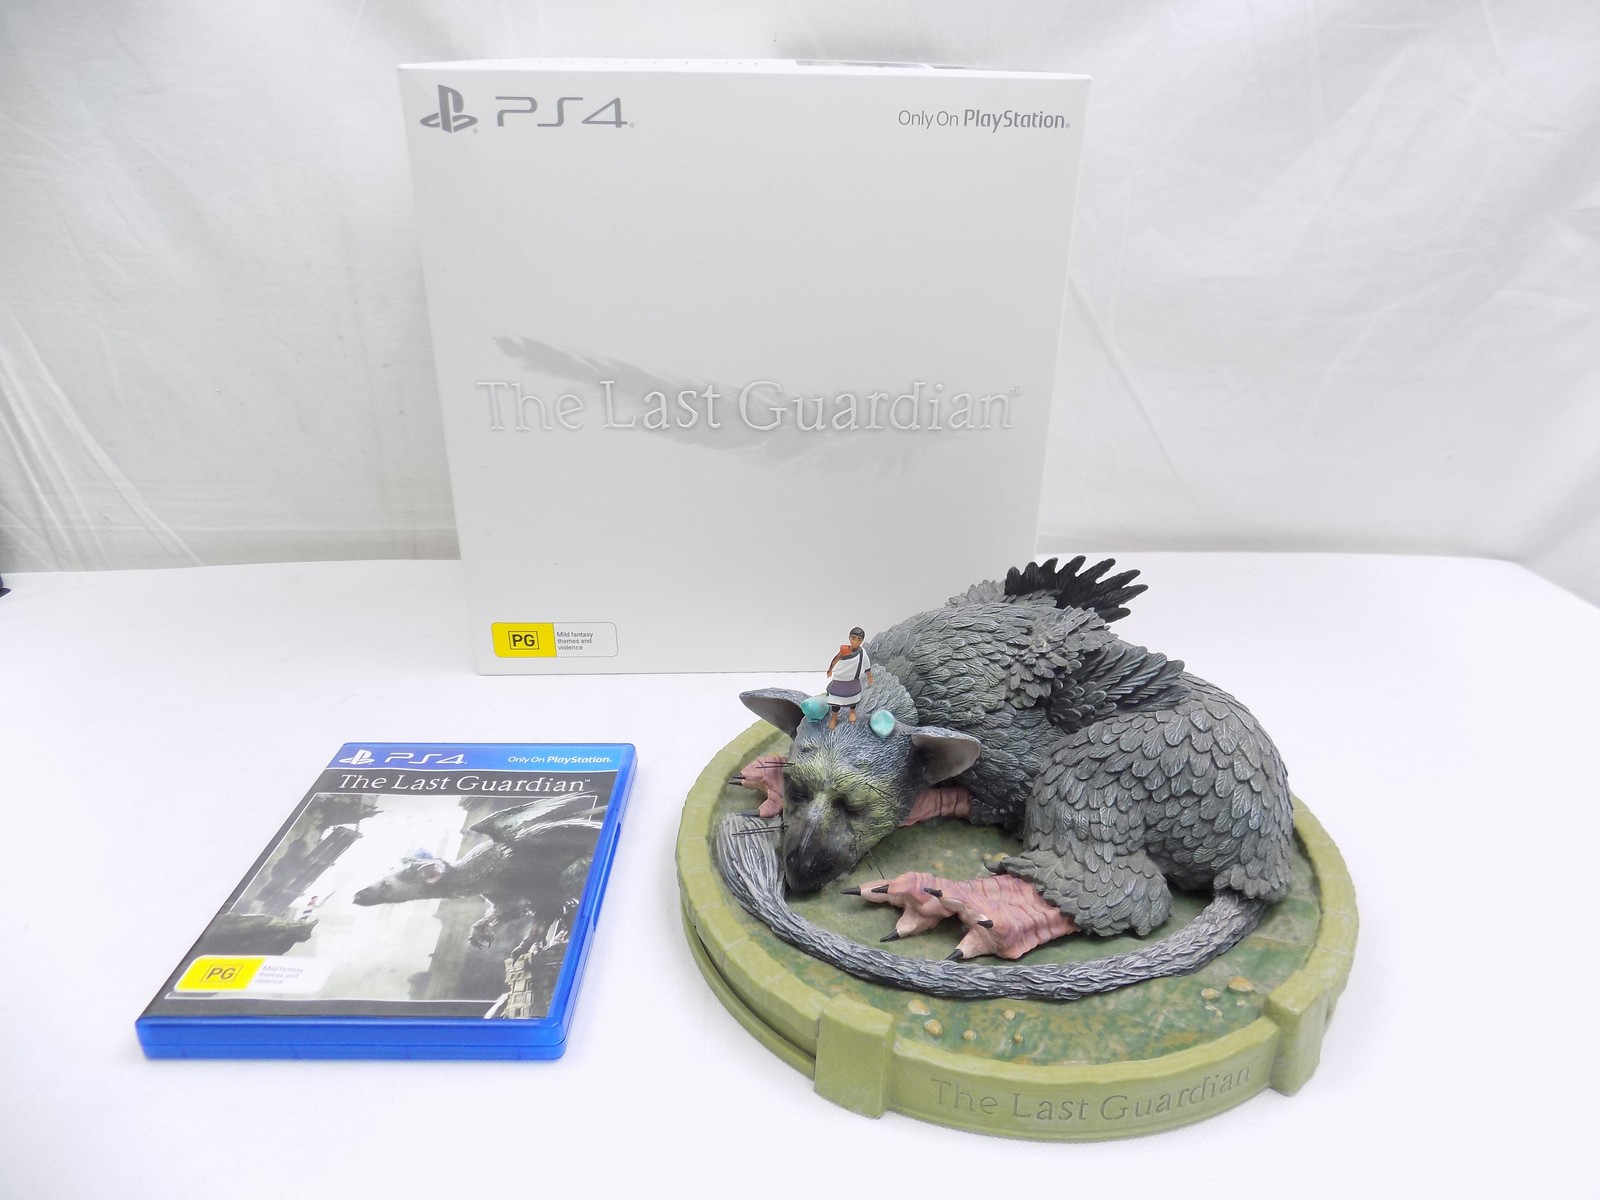 The Last Guardian - Collector's Edition - PlayStation 4